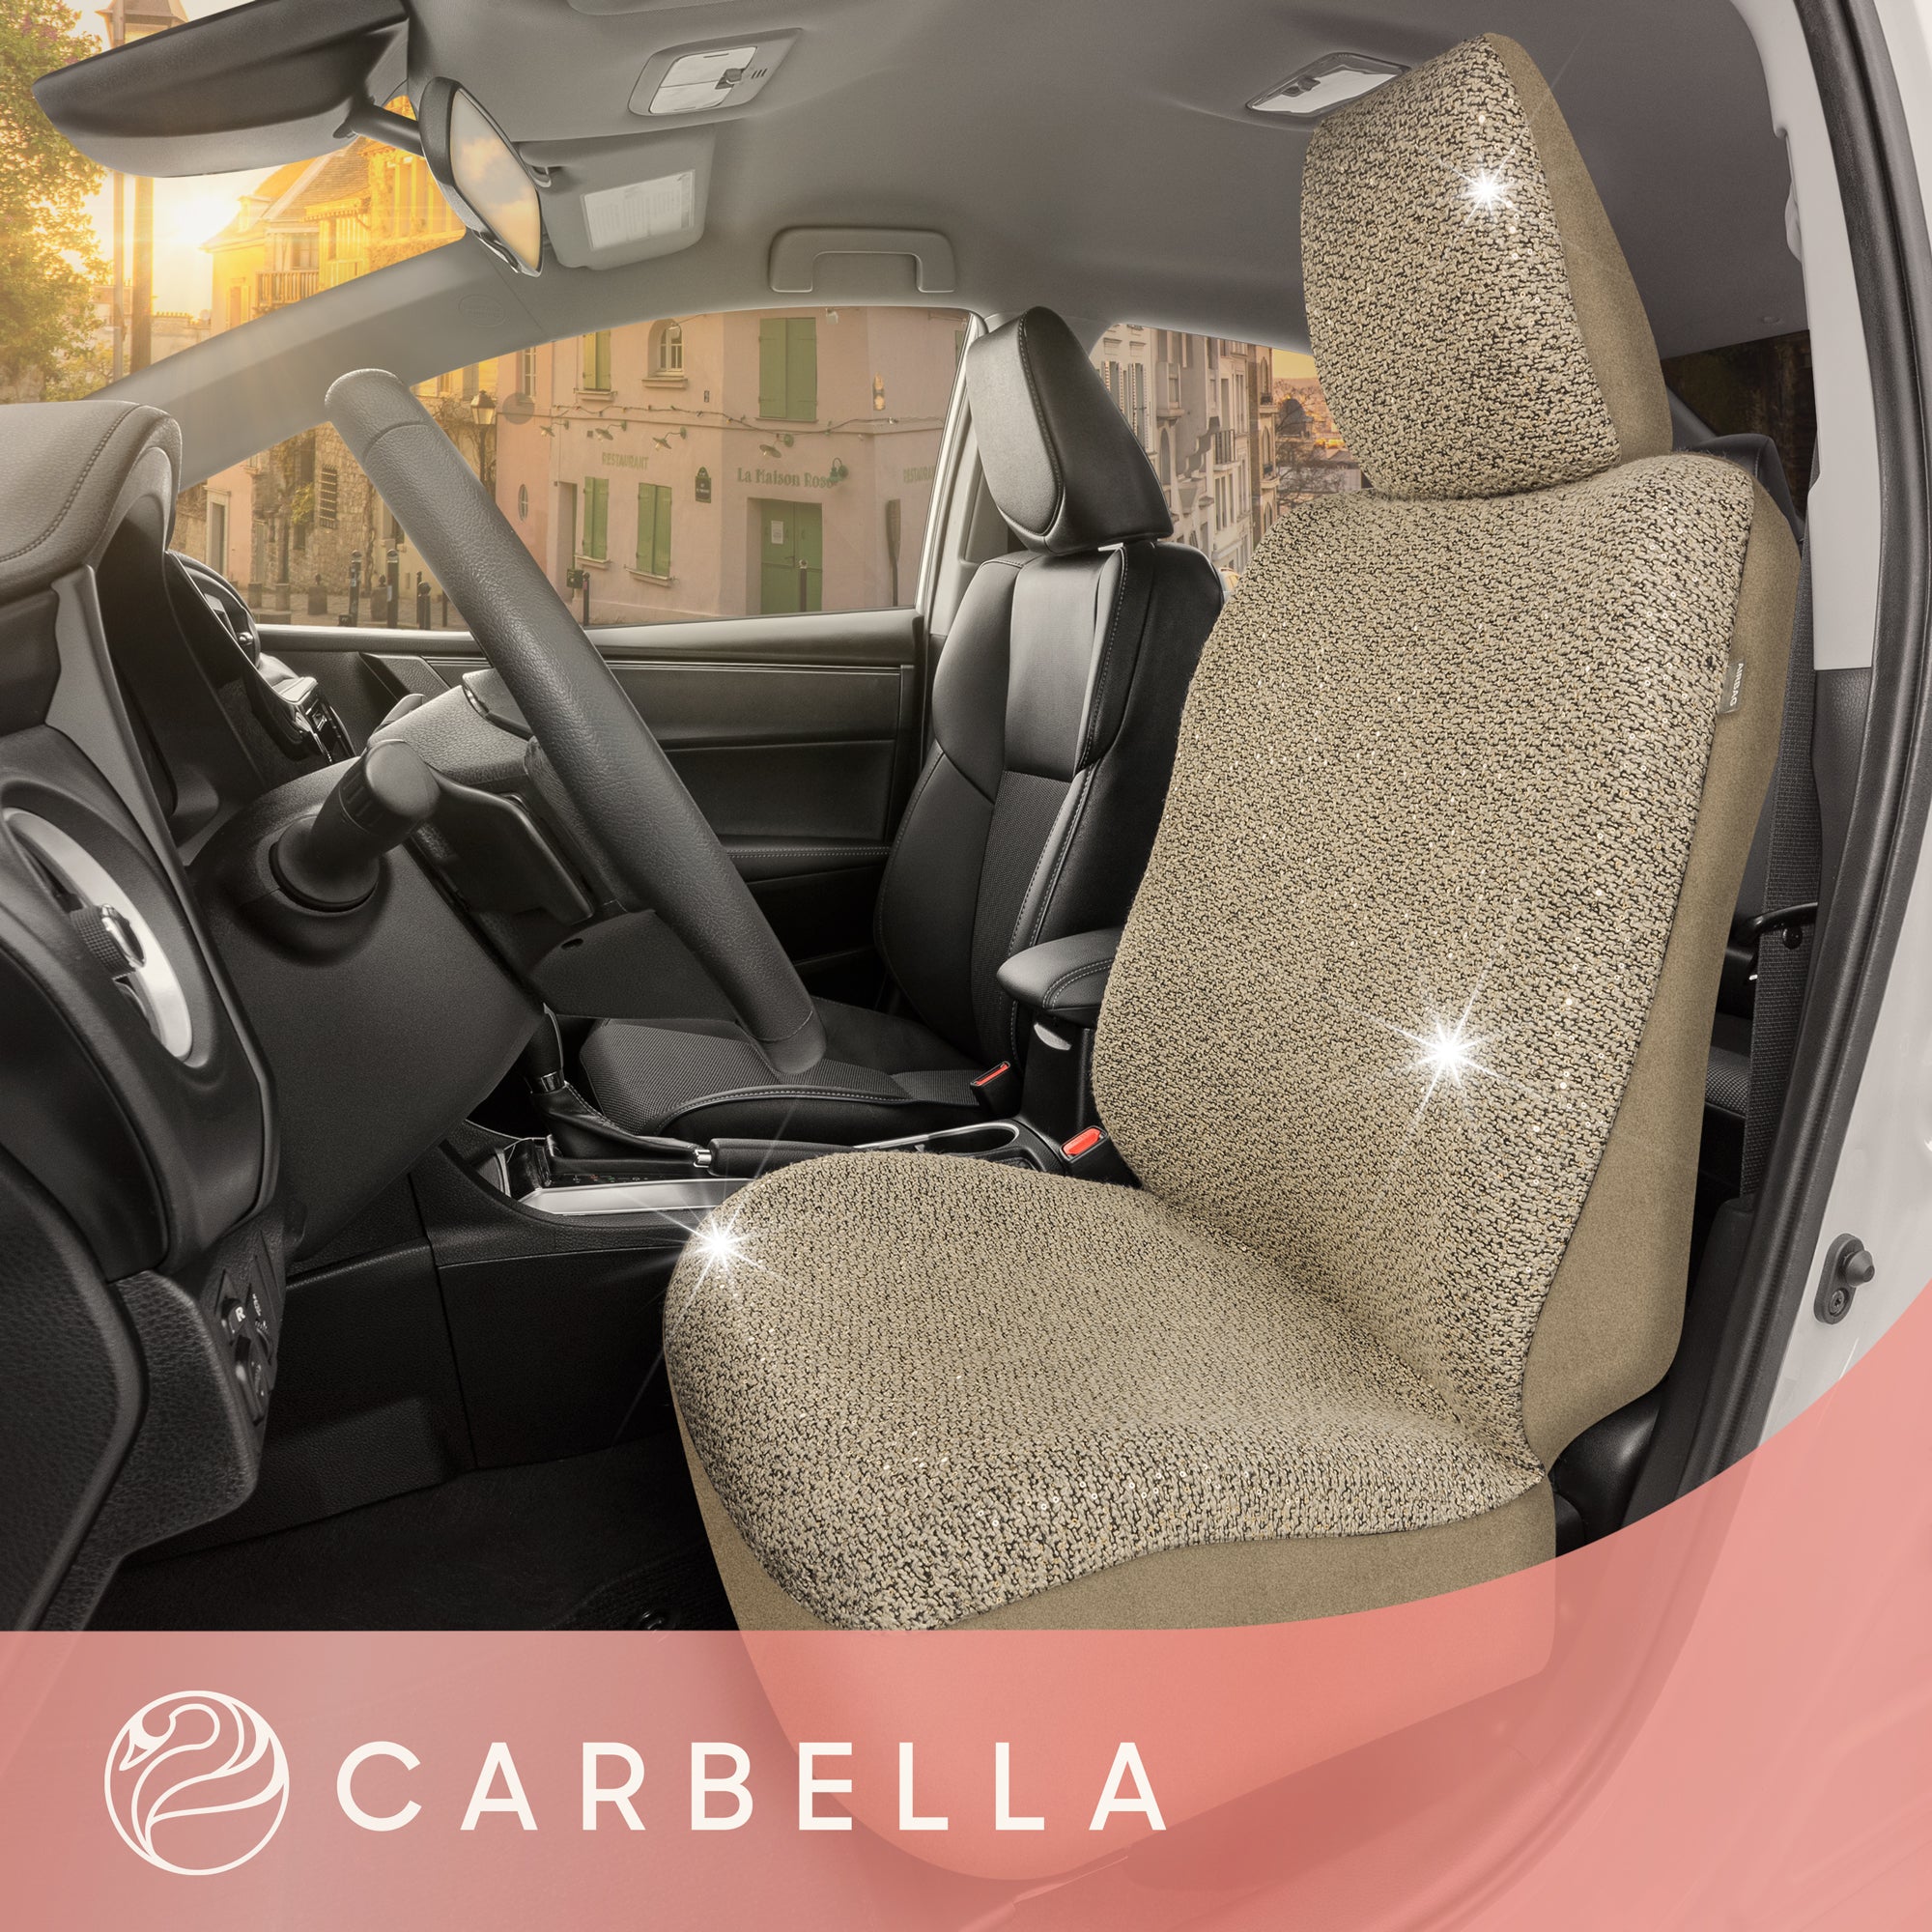 Carbella Sequin Tweed Bling Car Seat Cover, 1 Piece Beige Seat Cover for Cars with Shiny Bling Detail, Cute Automotive Interior Protector for Trucks Van SUV, Car Accessories for Women